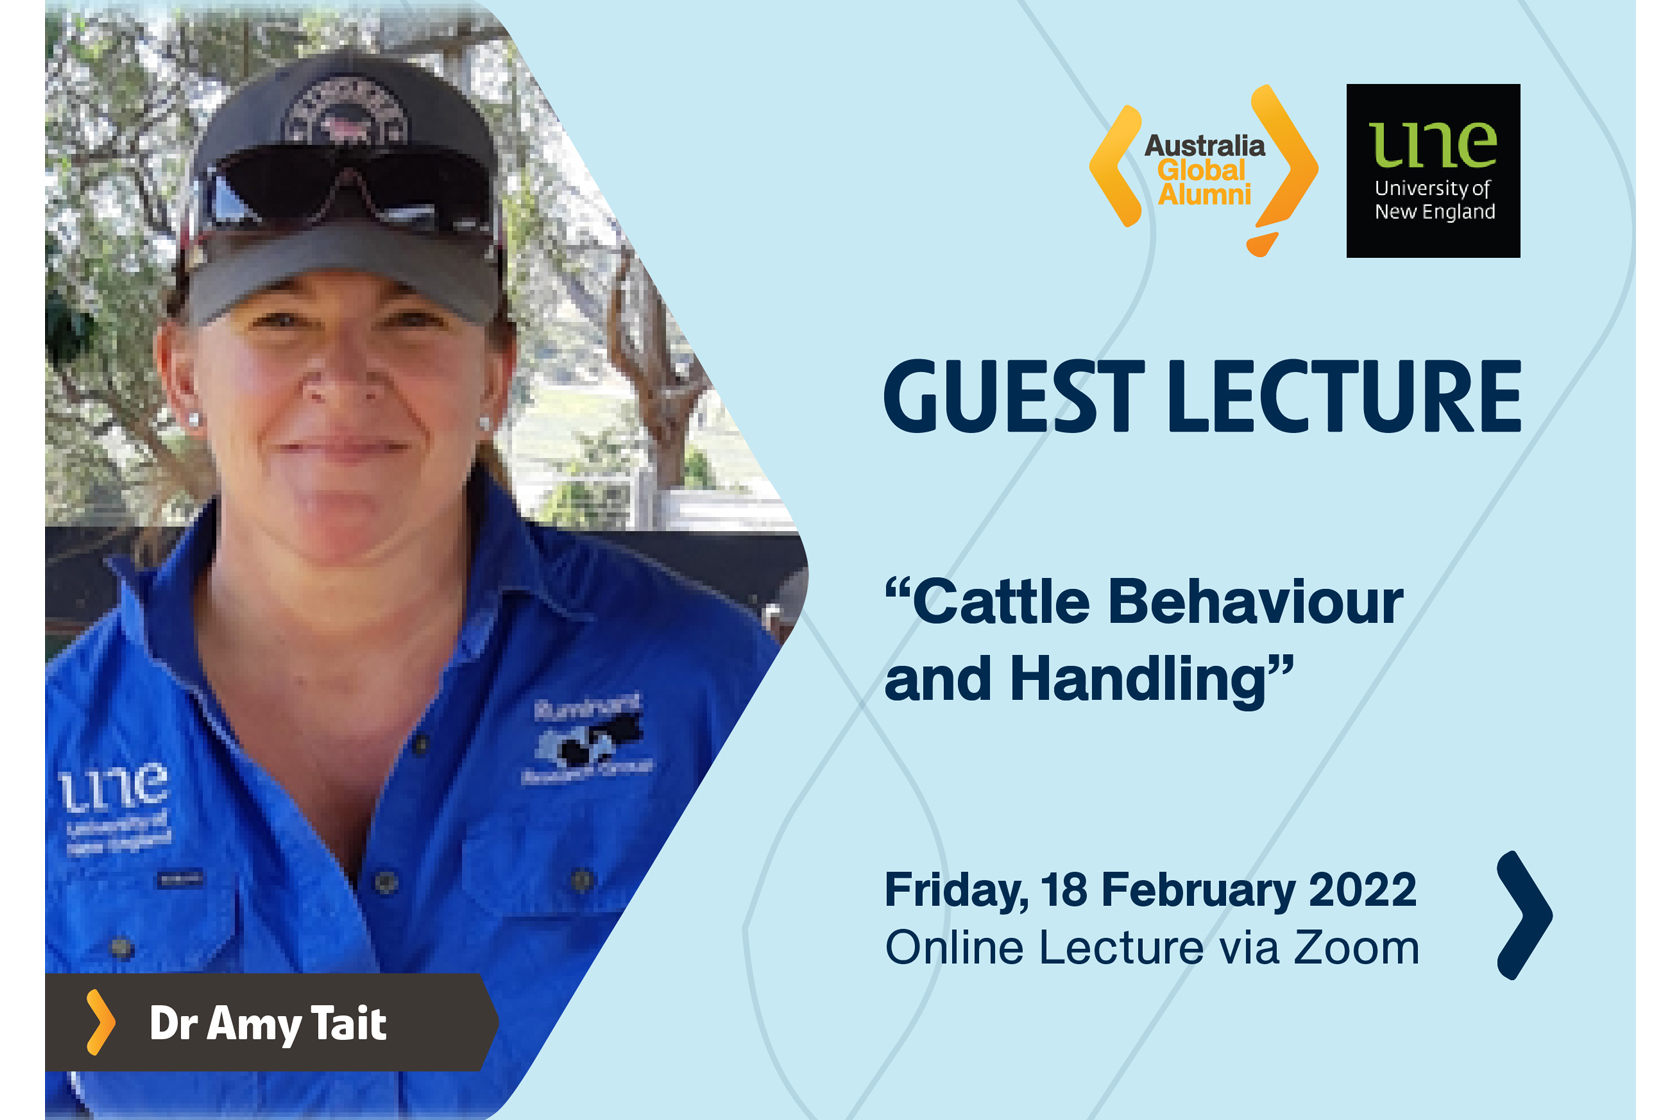 Let’s Join Our Online Lecture on Cattle Behaviour and Handling